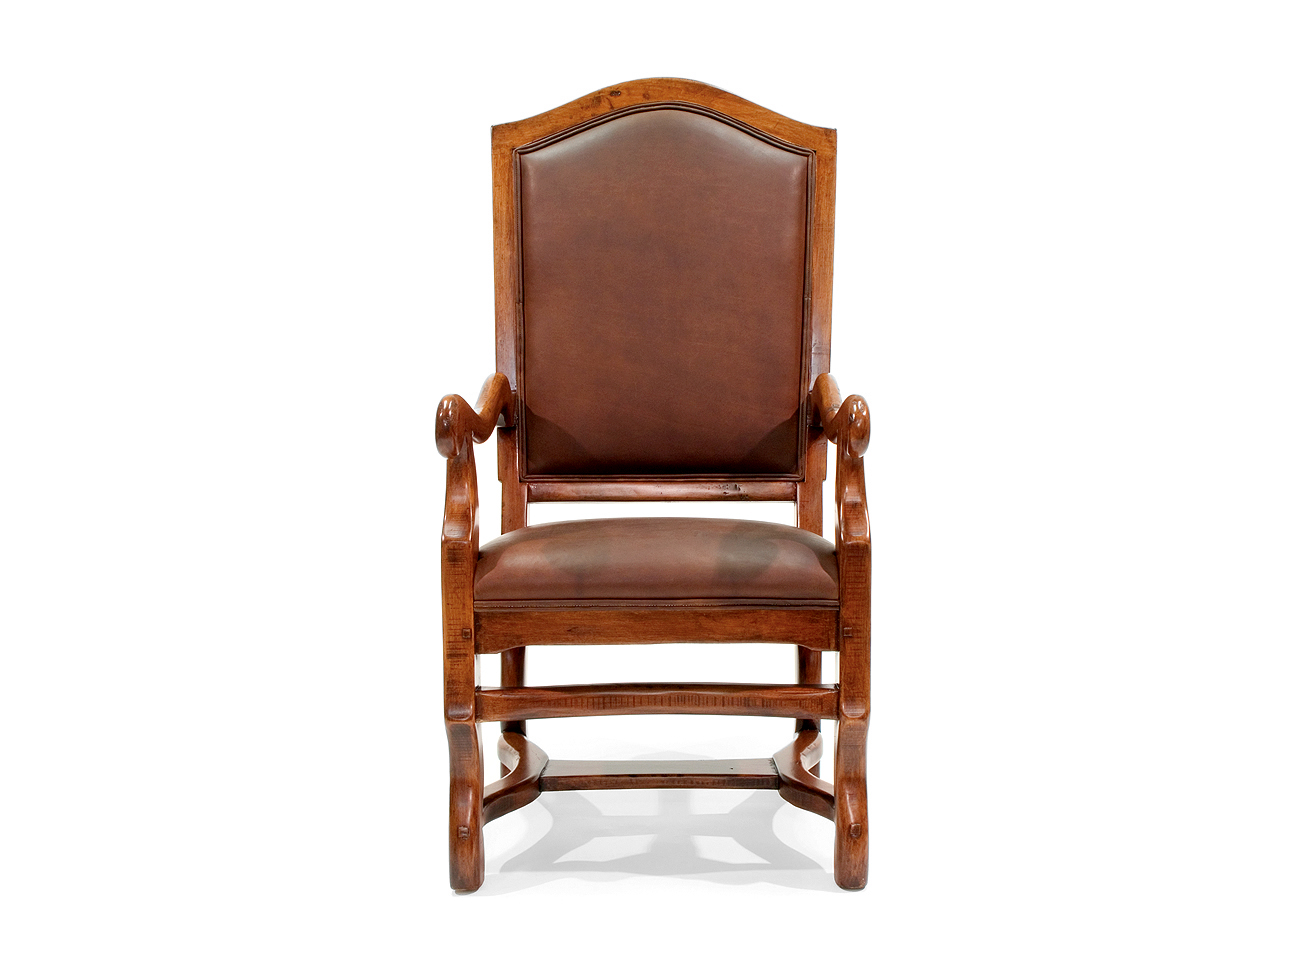 Robert-Seliger-Languedoc-Leather-Chair-front